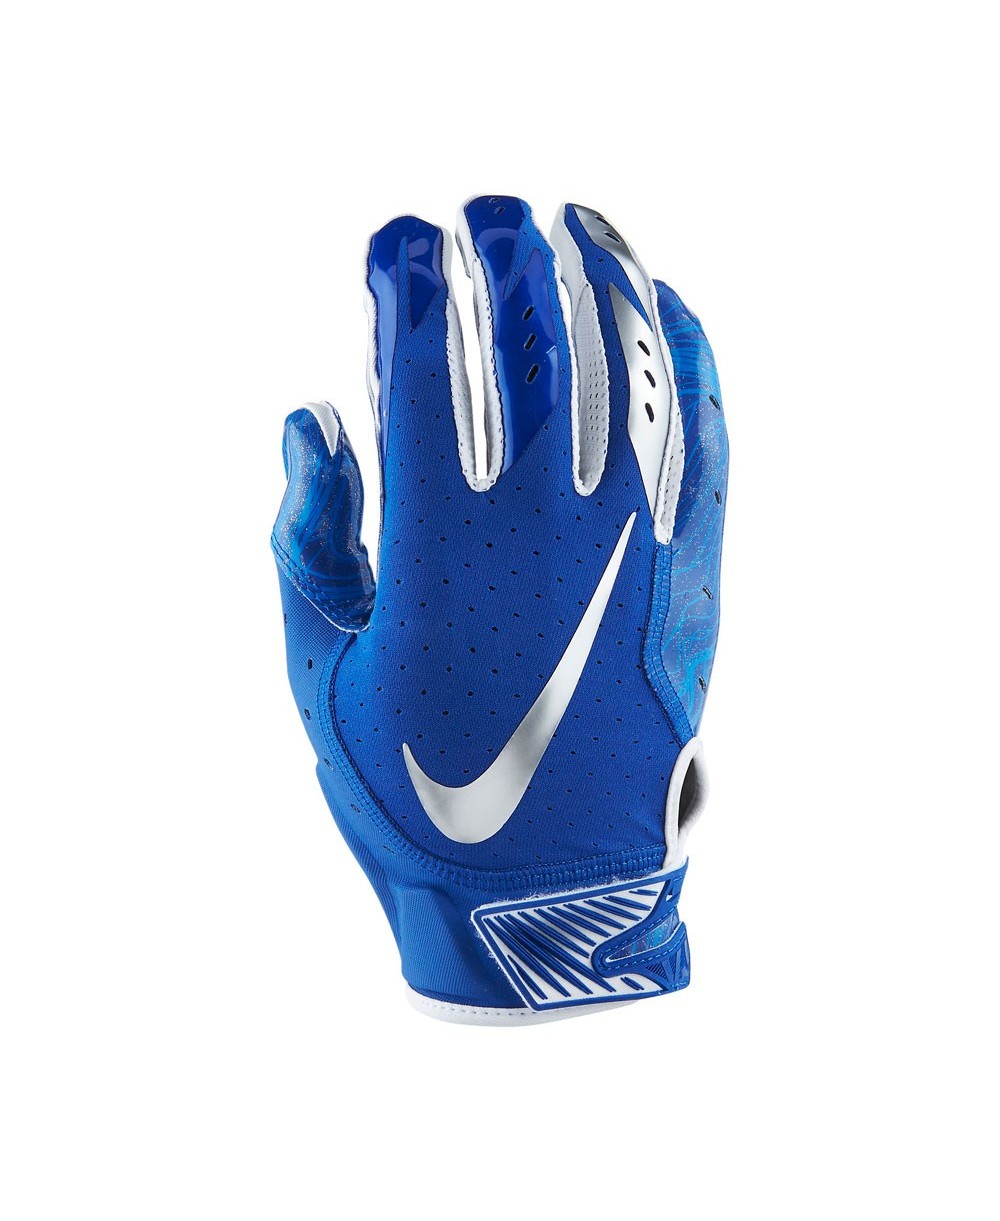 Customize Your Own Nike Football Gloves - Images Gloves and ...